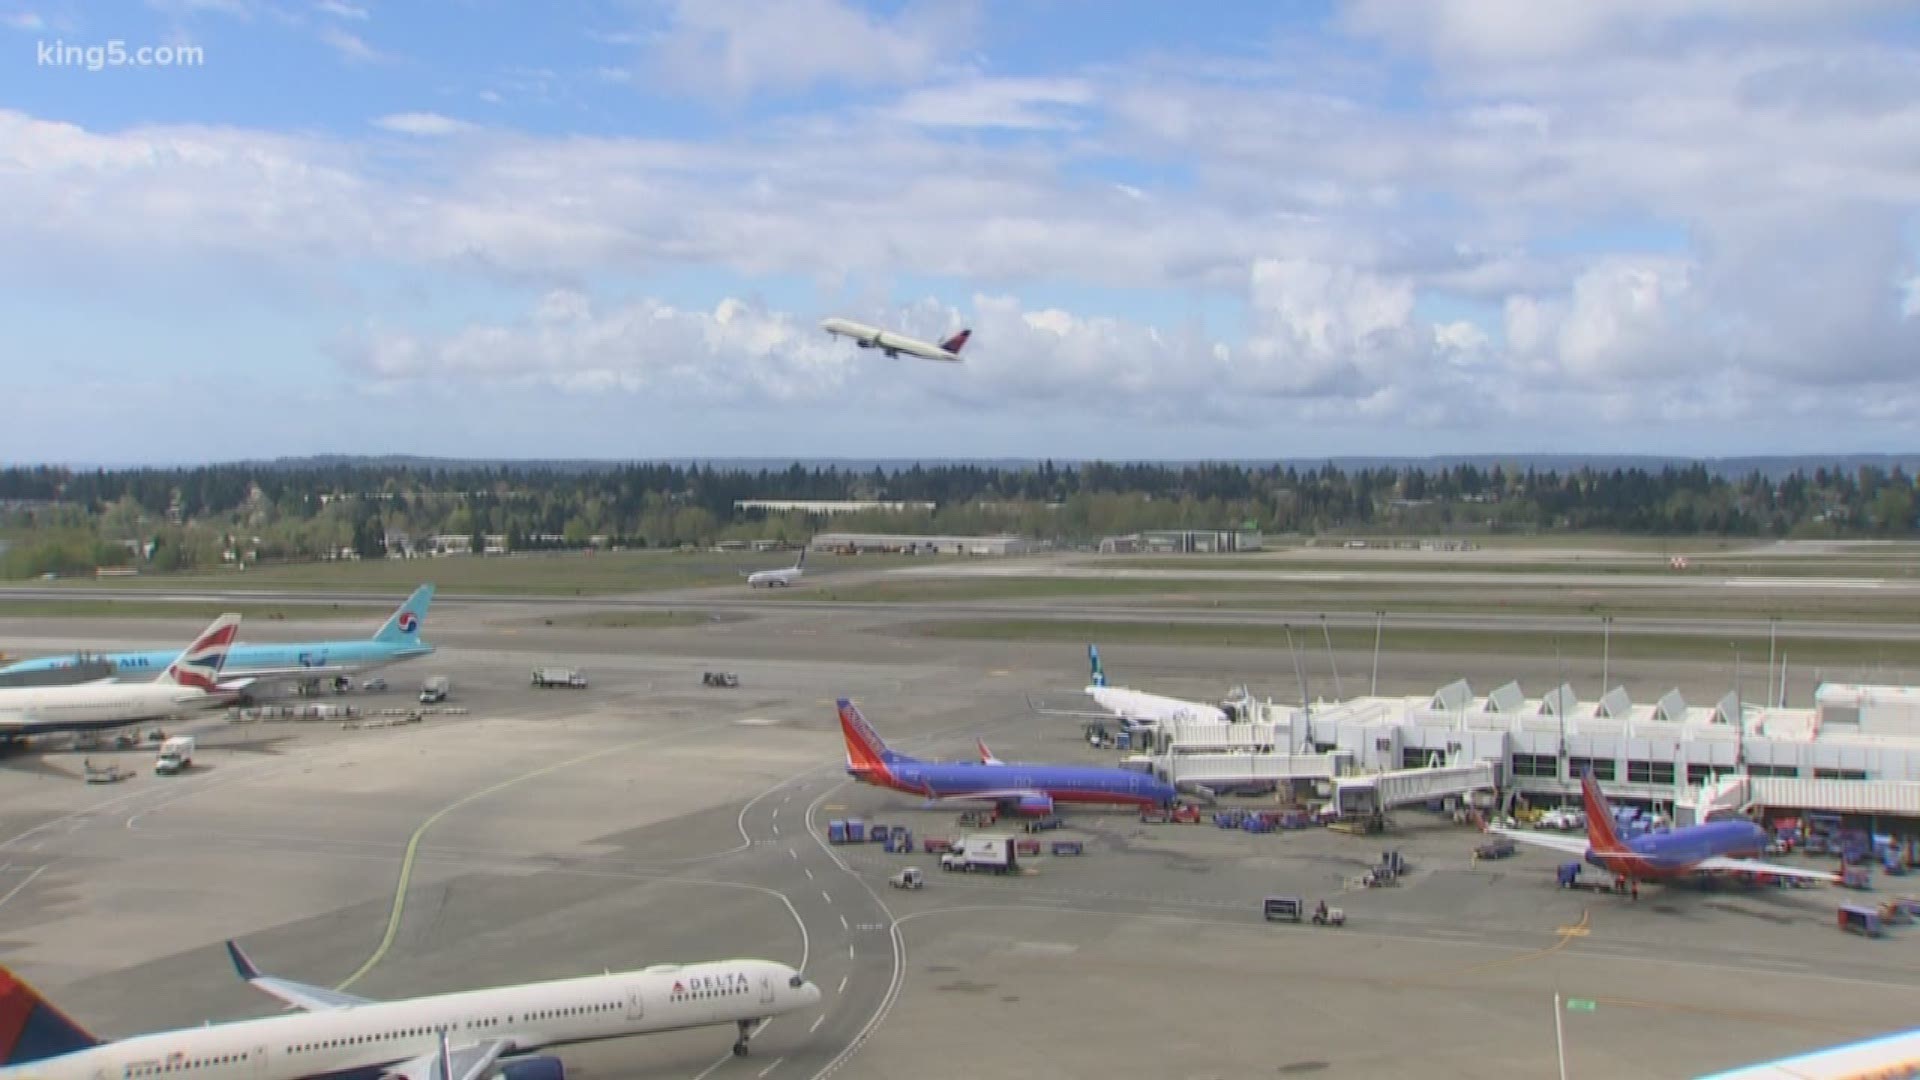 Sea-Tac is one of the busiest and fastest-growing airports in the country. Much of that growth is due to new and returning international flights. KING 5's Glenn Farley reports